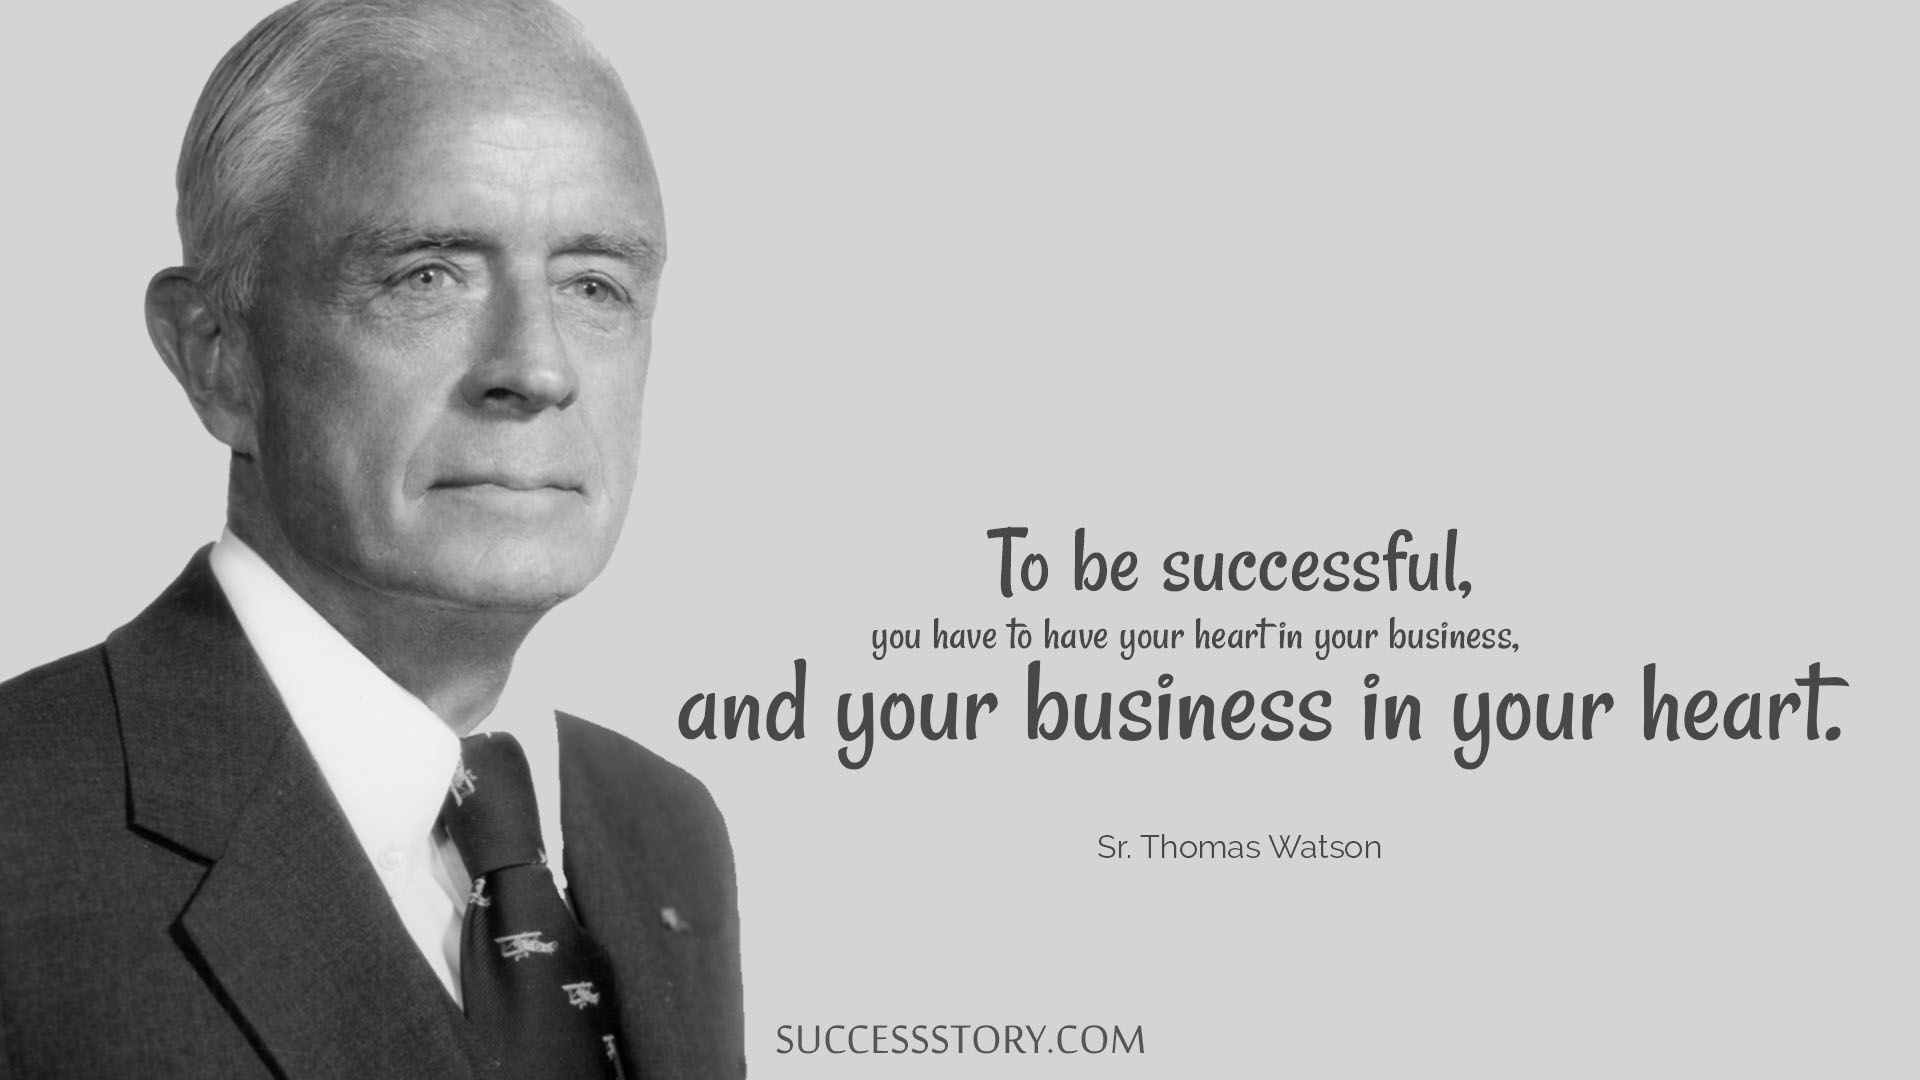 Sr. Thomas Watson Quotes  Famous Quotes  SuccessStory